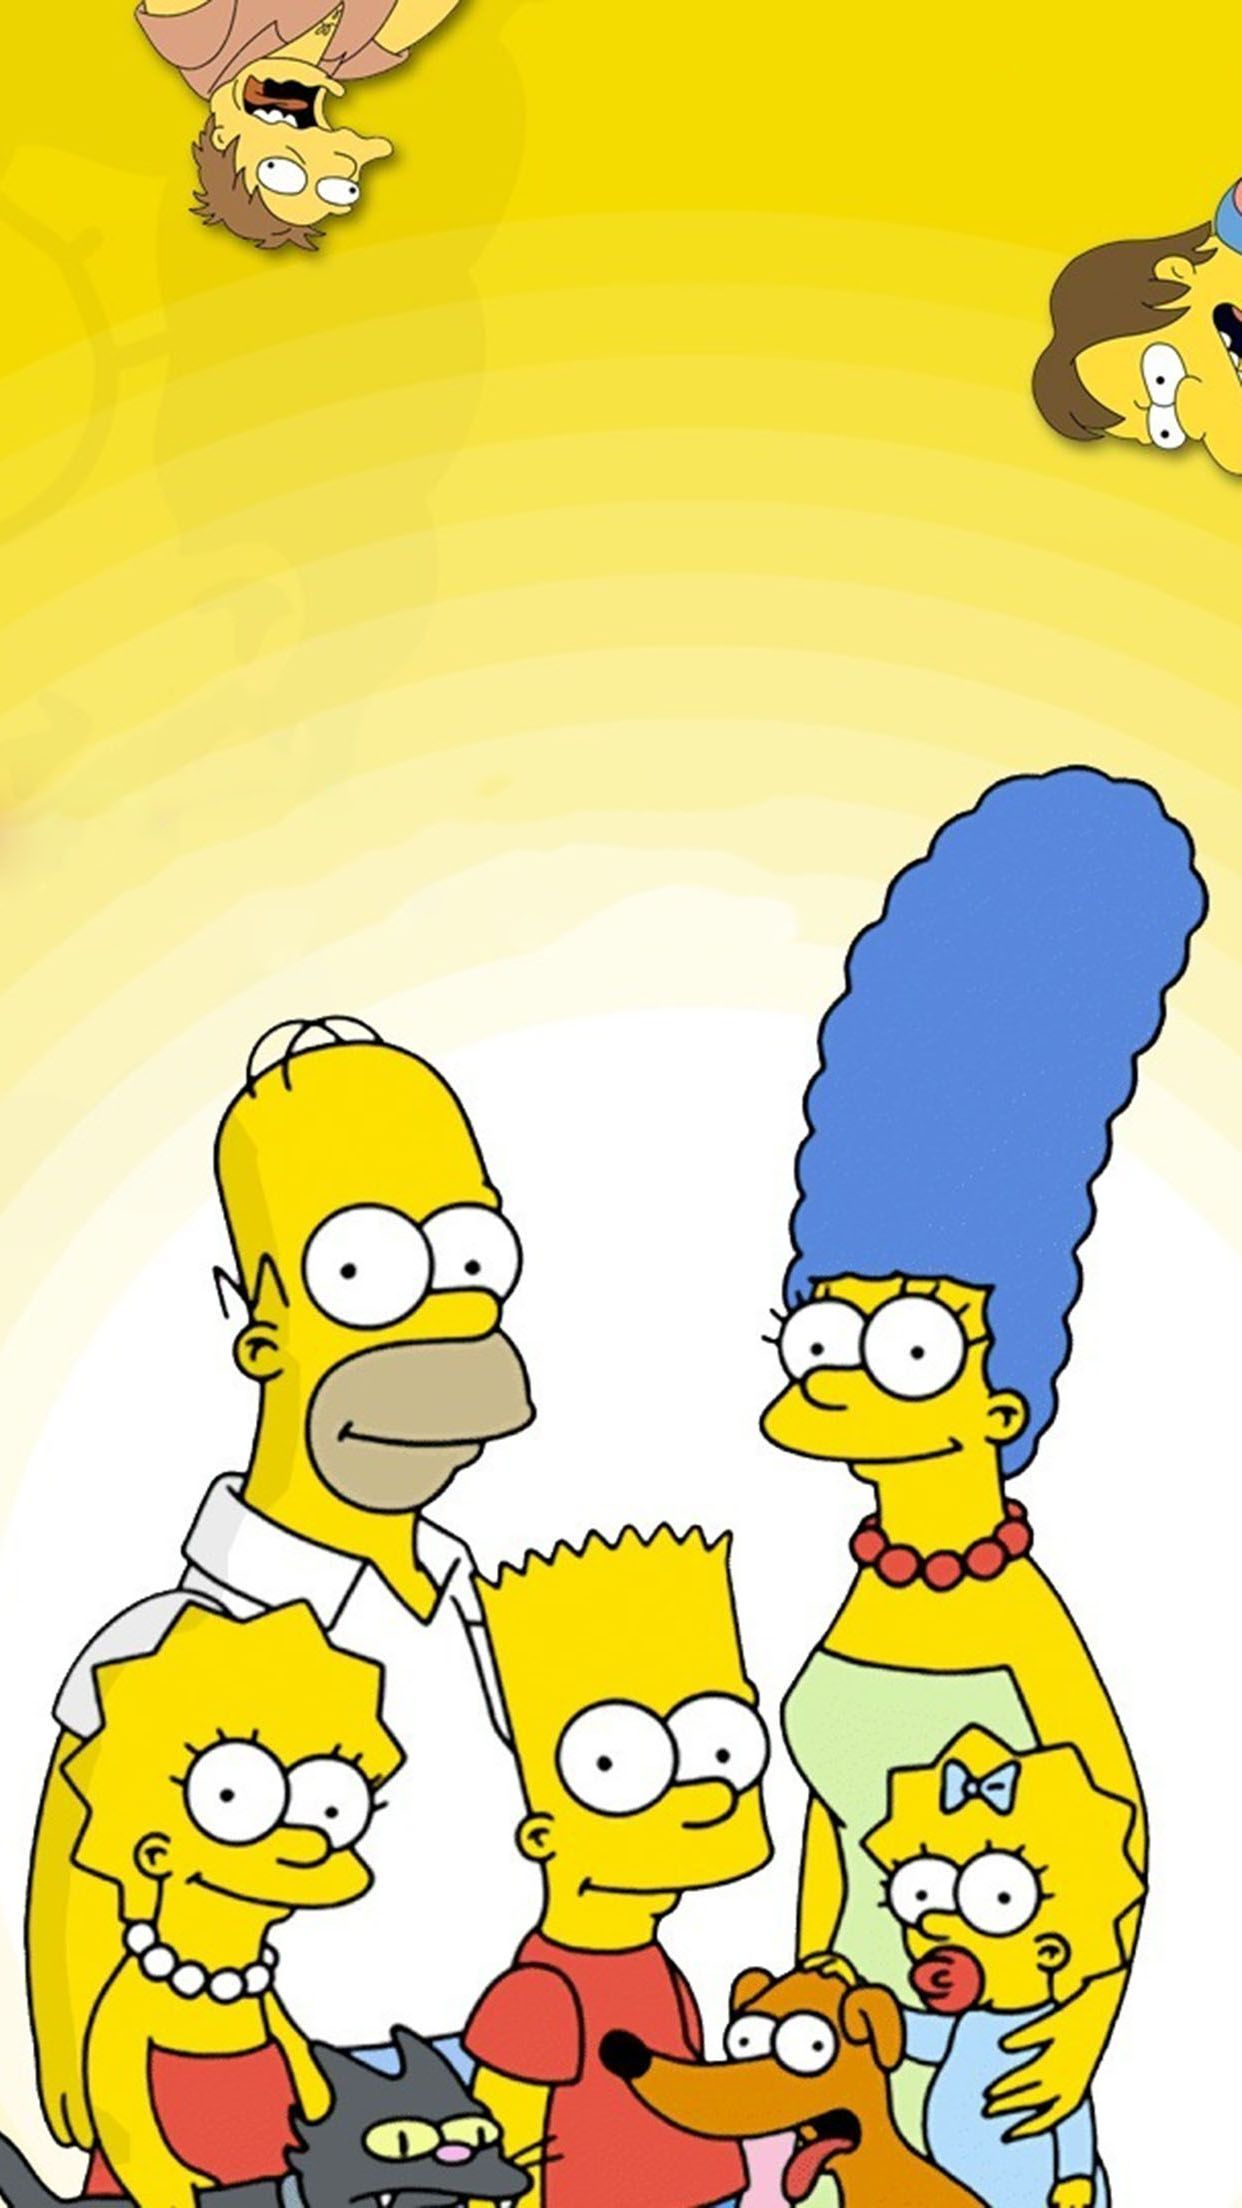 Simpsons Family Wallpaper for iPhone Pro Max, X, 6